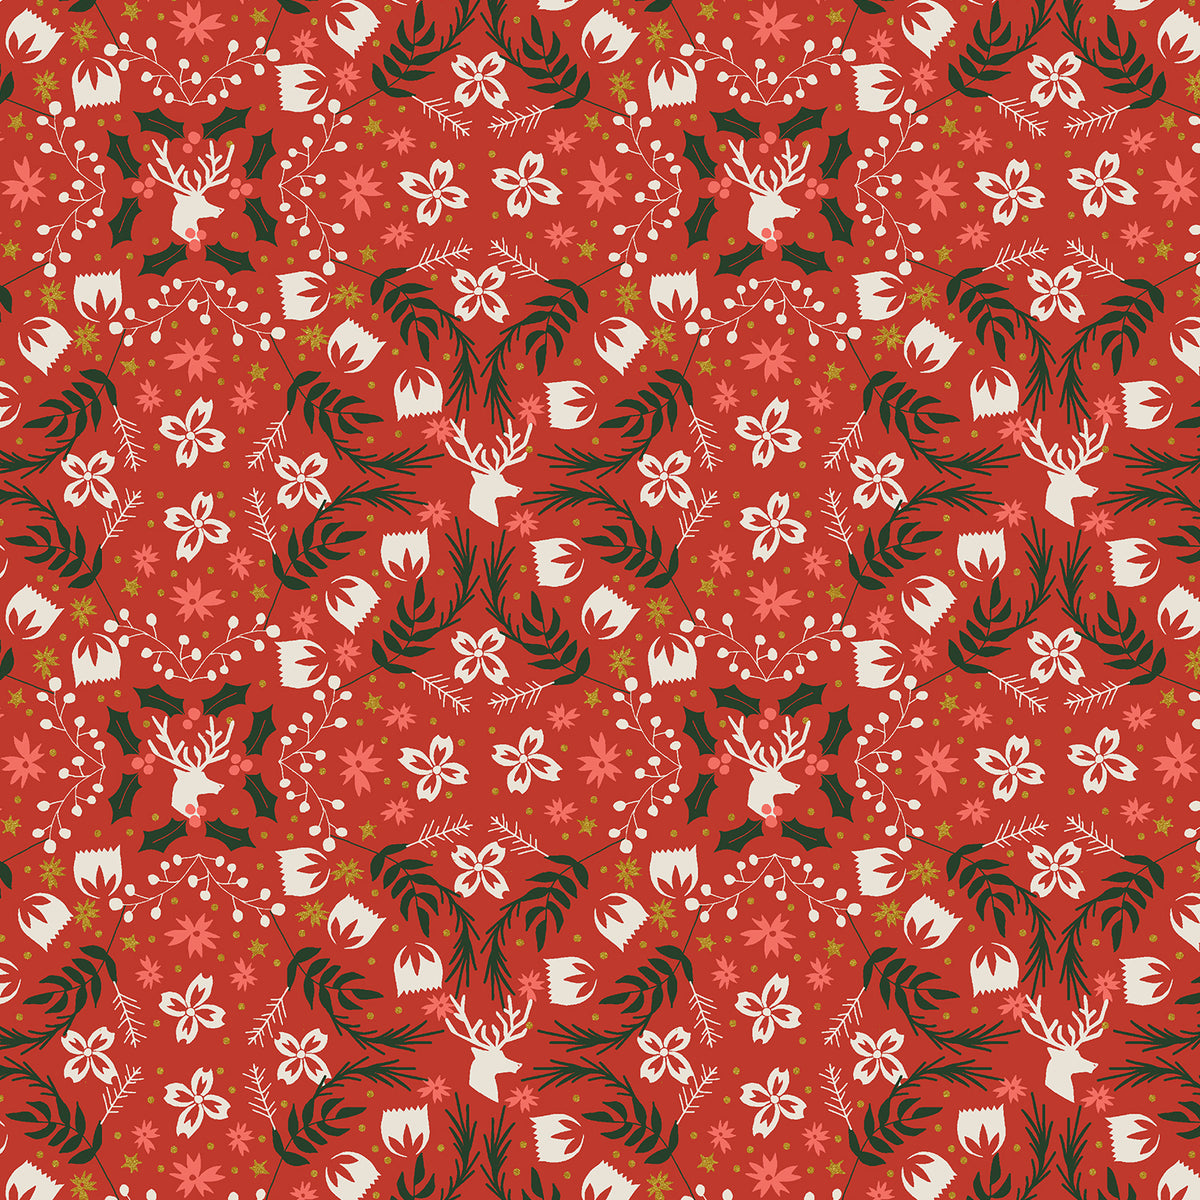 Tinsel on the Trail Quilt Fabric by Cotton+Steel - Gather (Reindeer Geometric) in Holly (Red) - AC602-HO2M